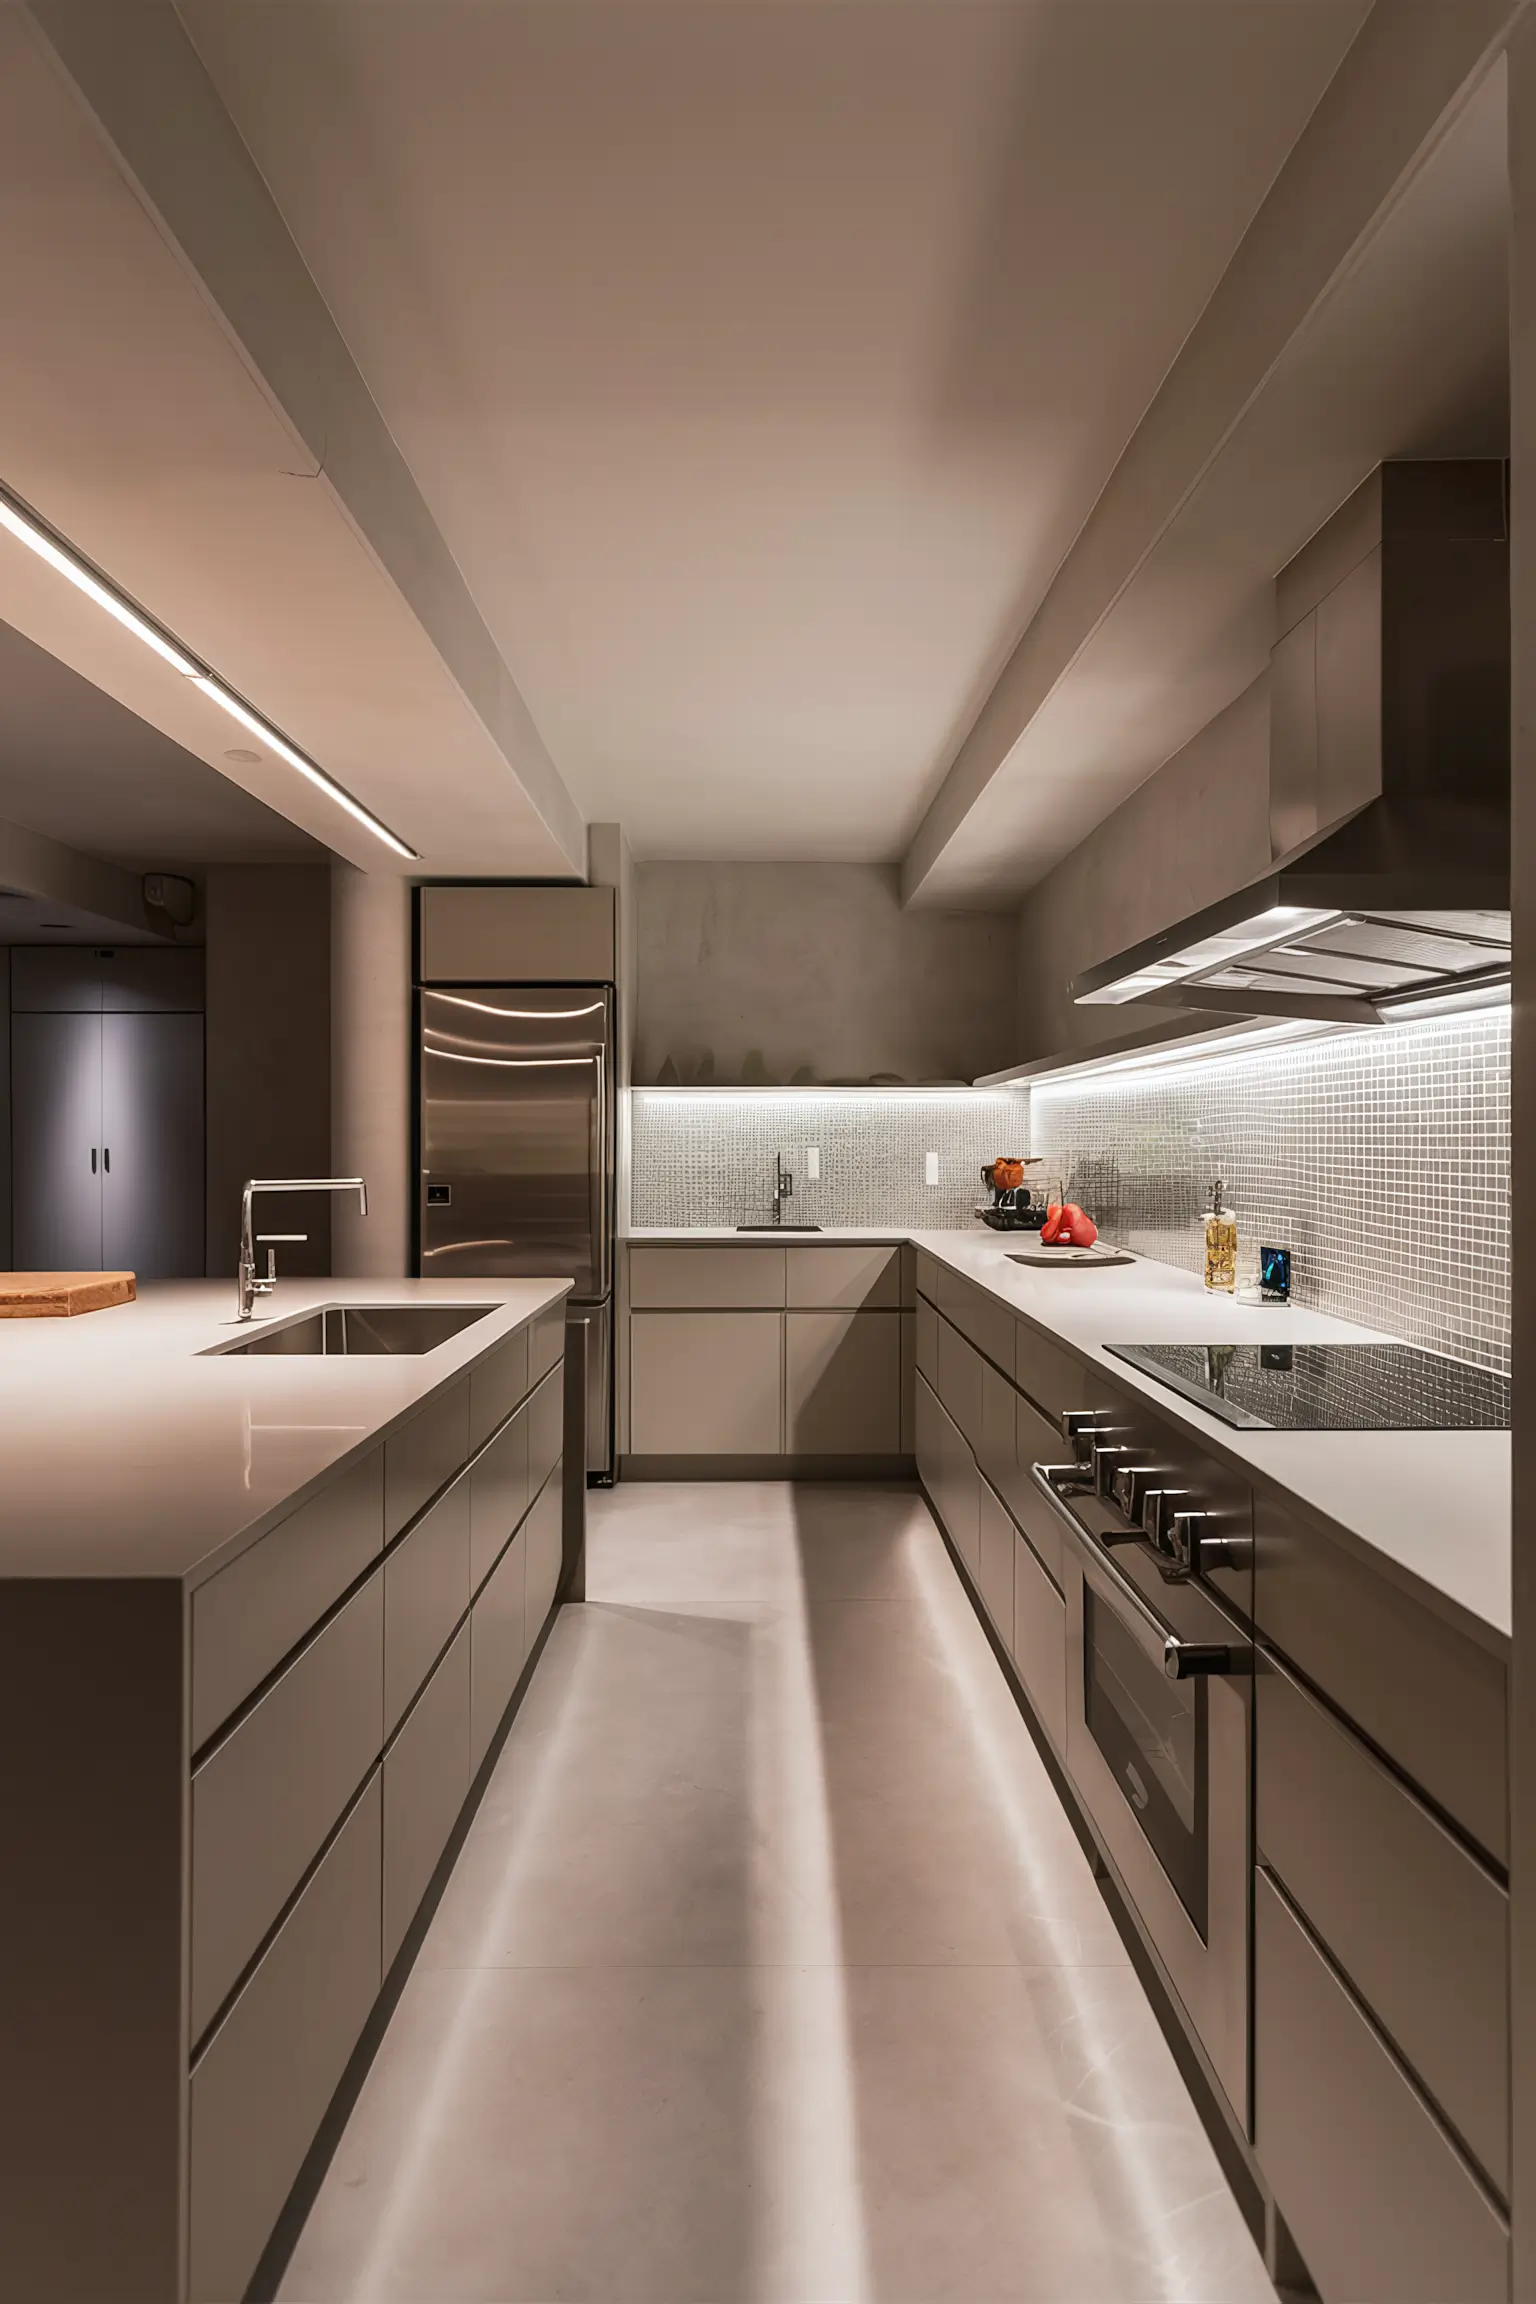 Minimalistic basement kitchen with sleek countertops and stainless steel appliances.